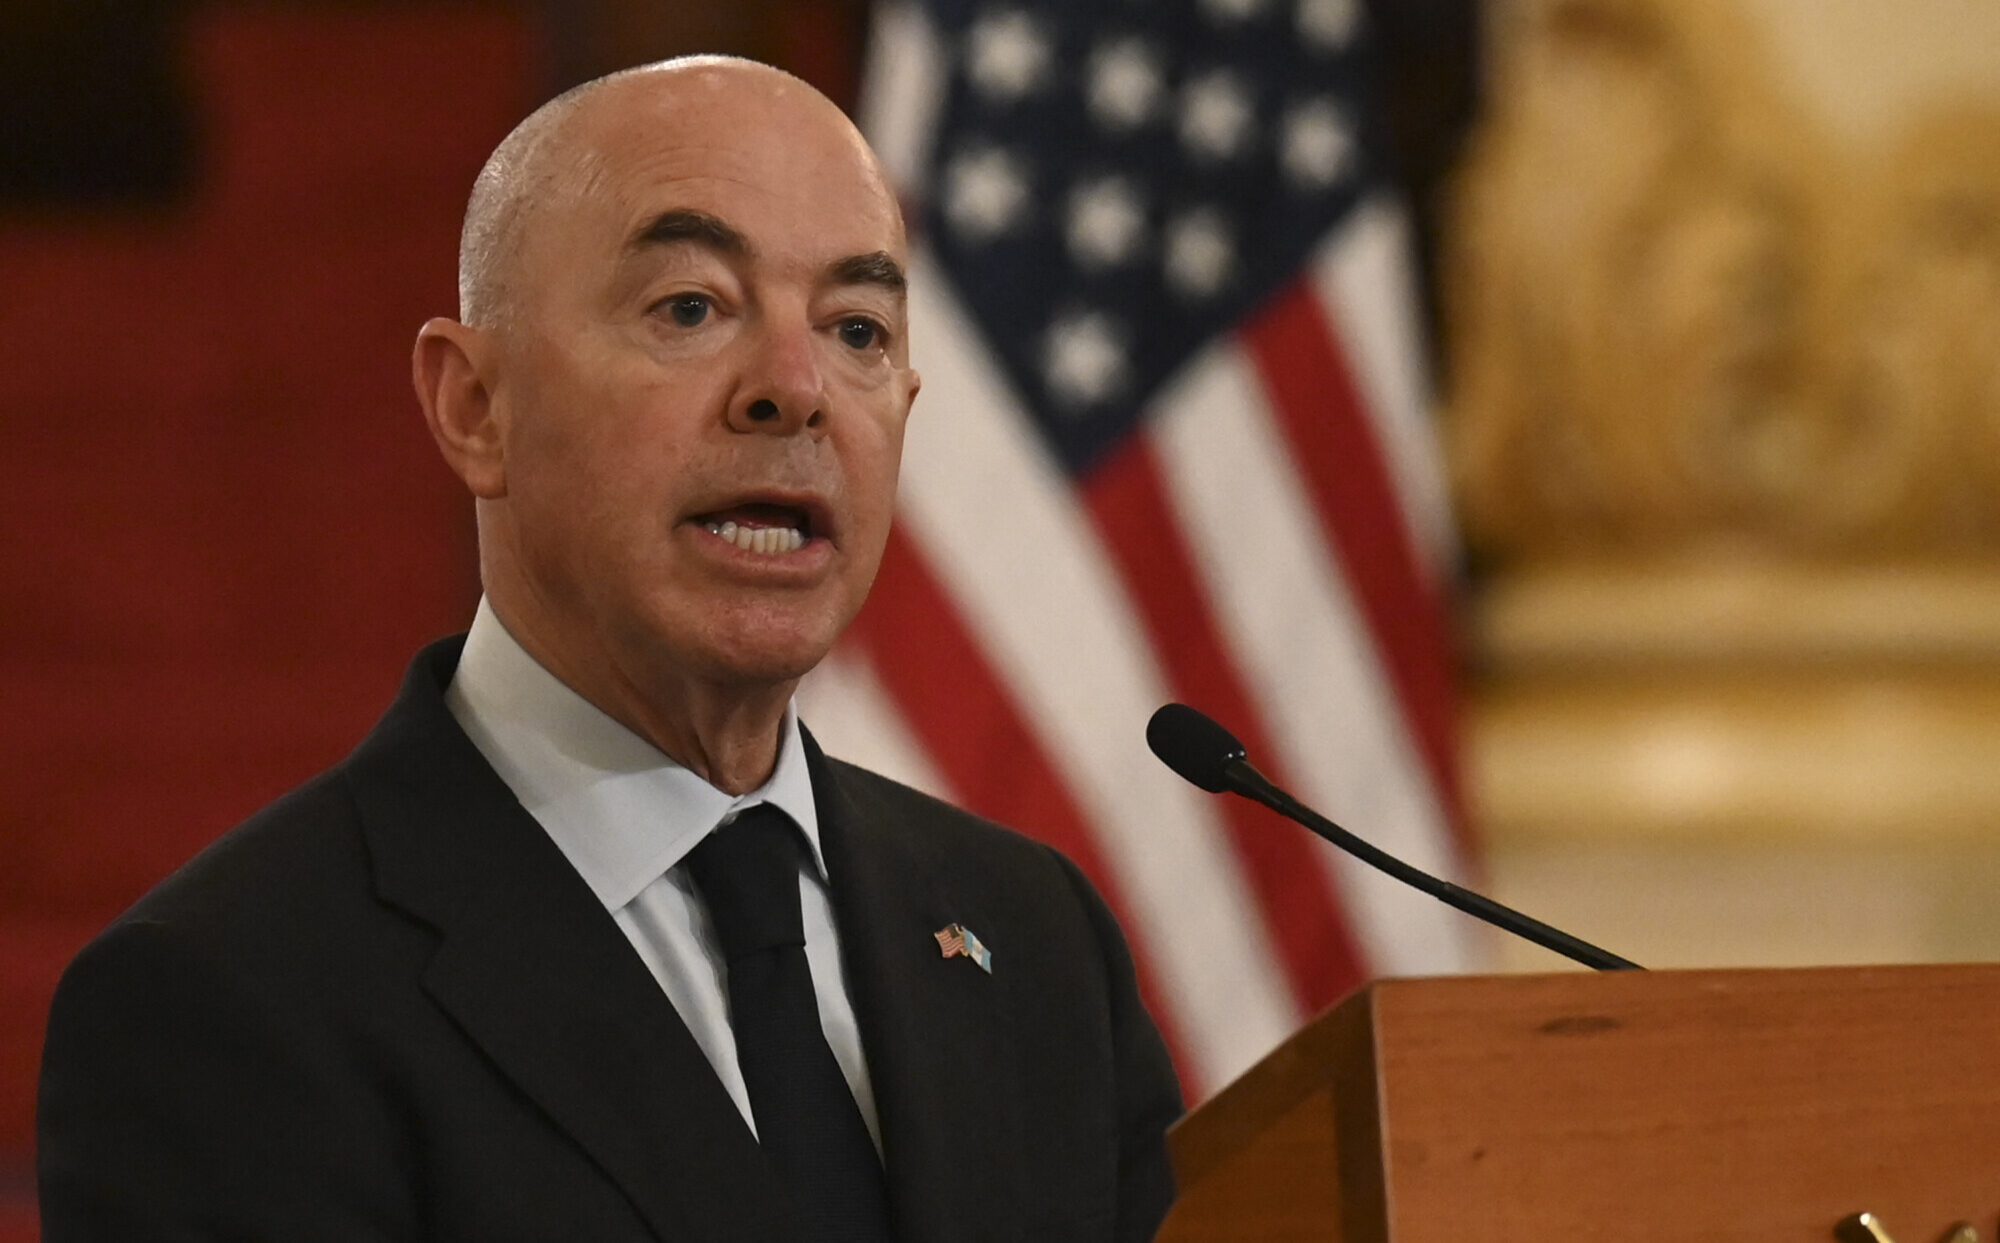 DHS Secretary Mayorkas Ends ‘Remain in Mexico’ Program Despite Court Order